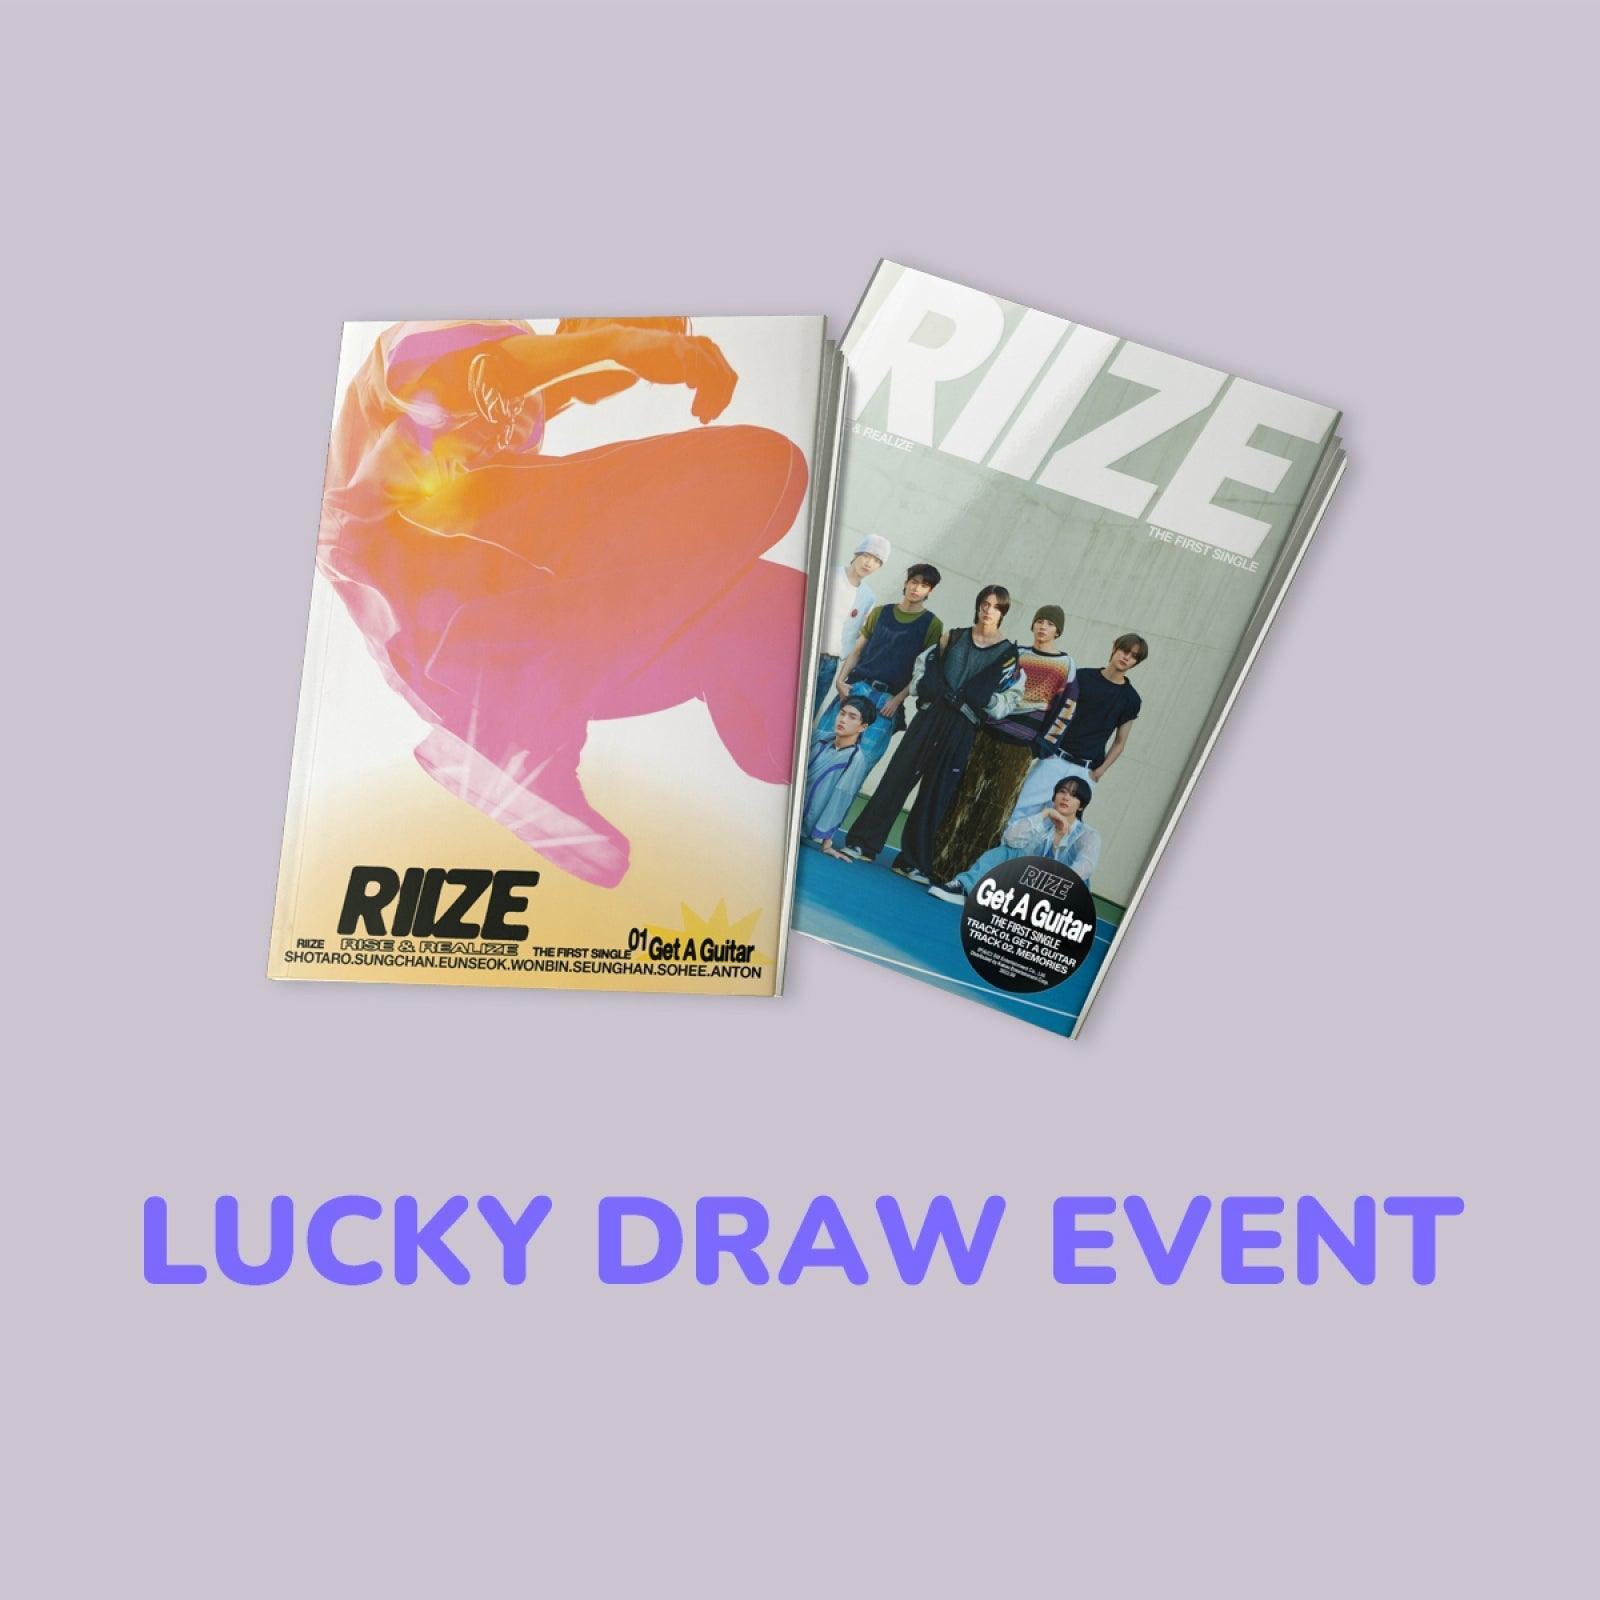 RIIZE - Get A Guitar / 1ST SINGLE ALBUM (SMTOWN LUCKY DRAW EVENT) - Shopping Around the World with Goodsnjoy